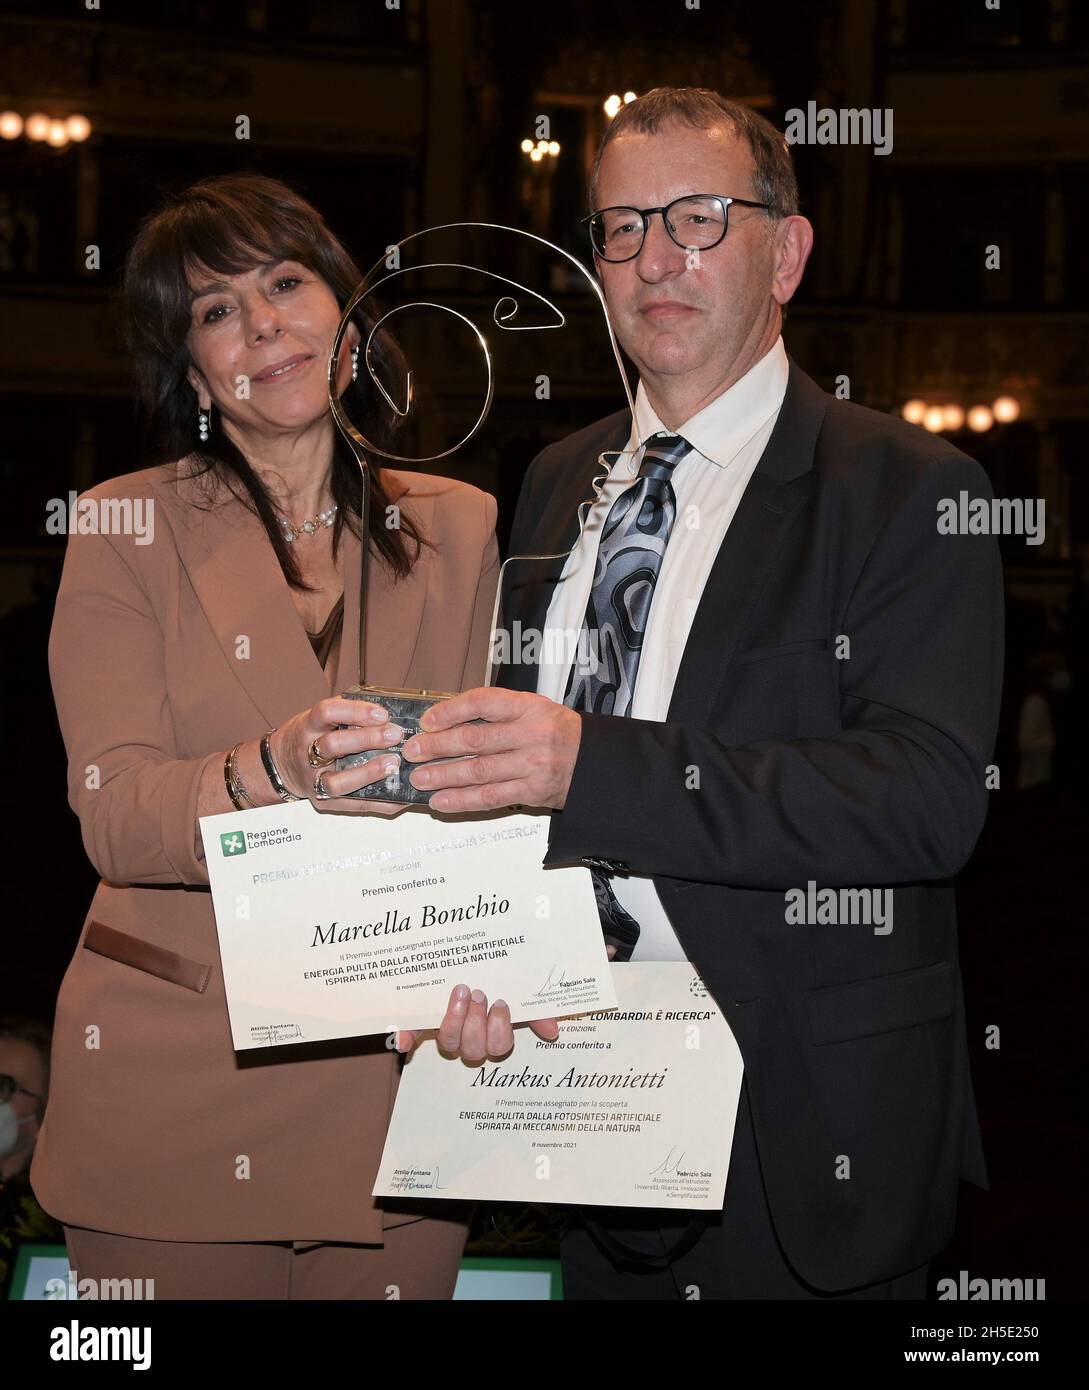 Milan, Italy. 08th Nov, 2021. Milan, Italy La Scala Marcella Bonchio, Markus Antonietti and Pierre Joliot are awarded the 2020-2021 edition of the International Award 'Lombardia è Ricerca', the recognition promoted by the Lombardy Region which assigns 1 million euros to the best scientific discovery in the field of 'Sciences of Life' attended by various institutions and famous guests In the picture: Credit: Independent Photo Agency/Alamy Live News Stock Photo